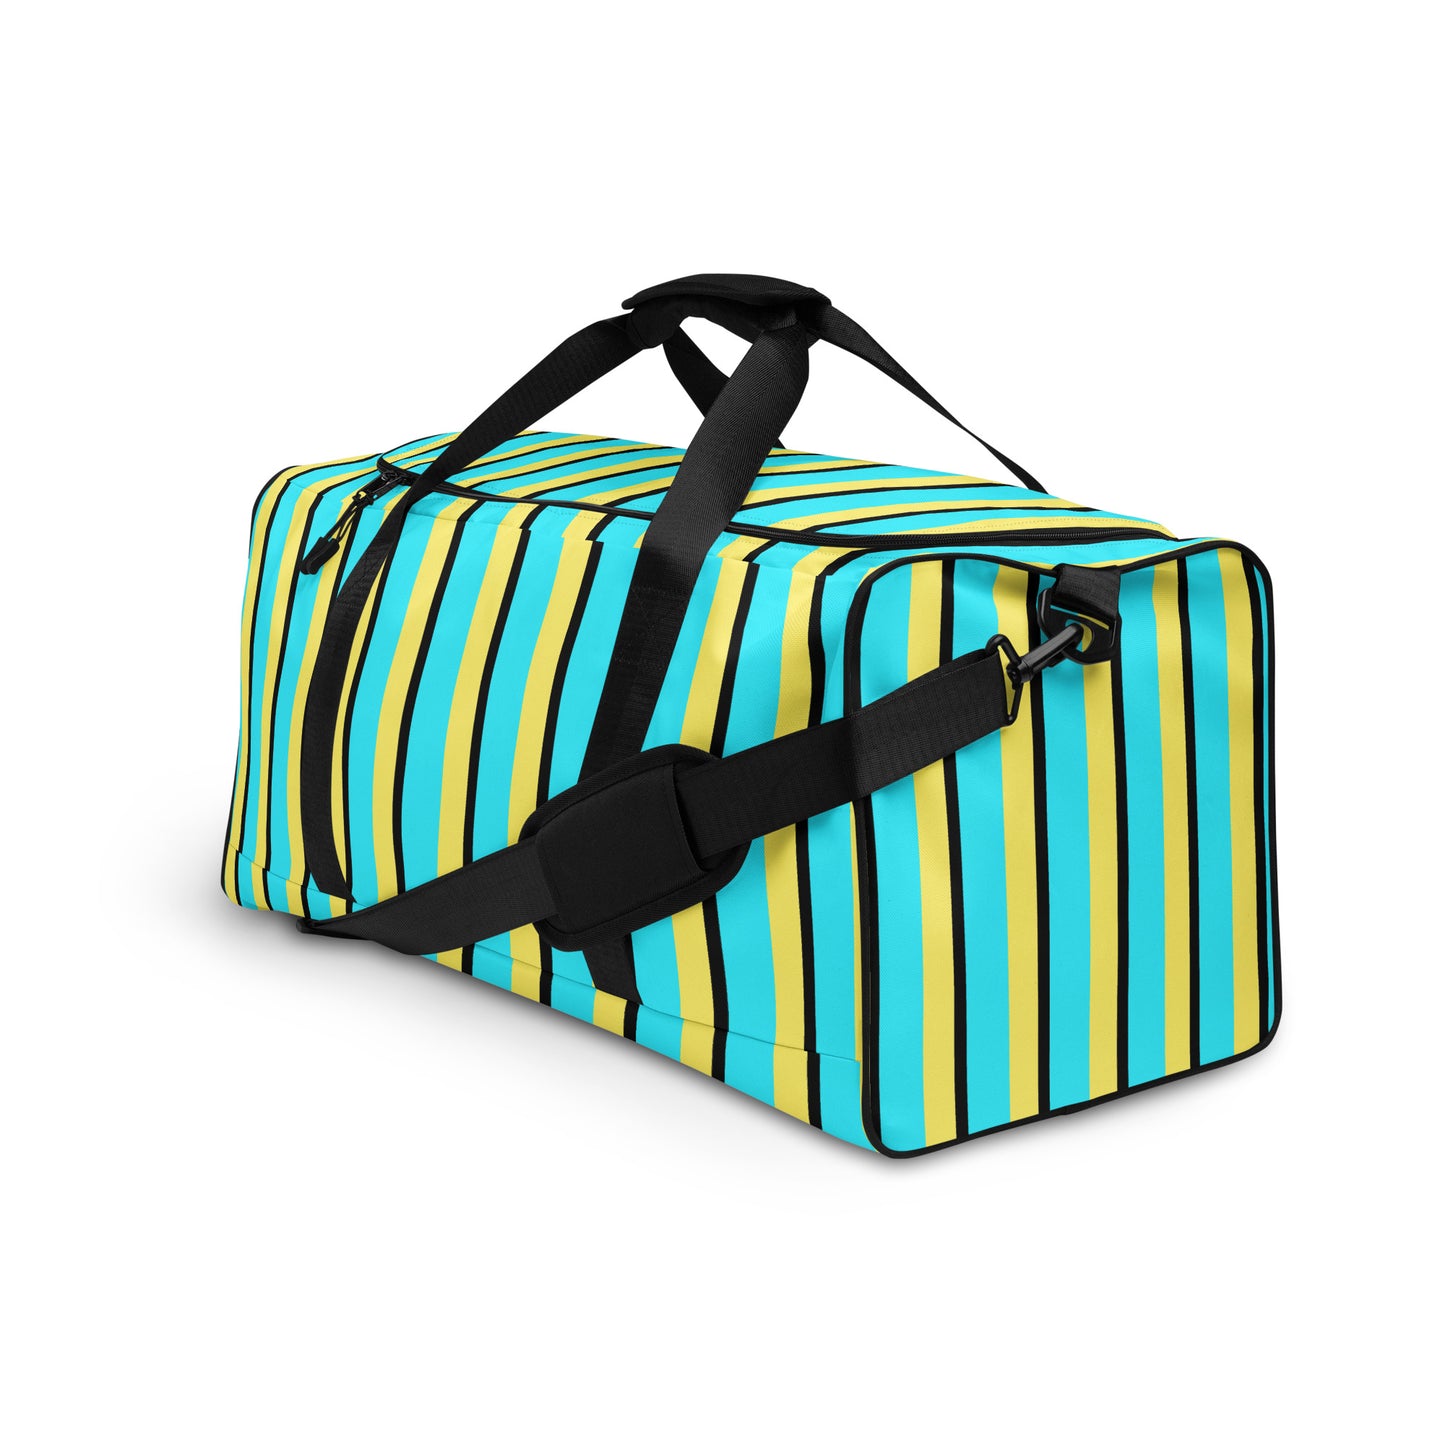 Vintage Stripes - Inspired By Harry Styles - Sustainably Made  Duffle bag